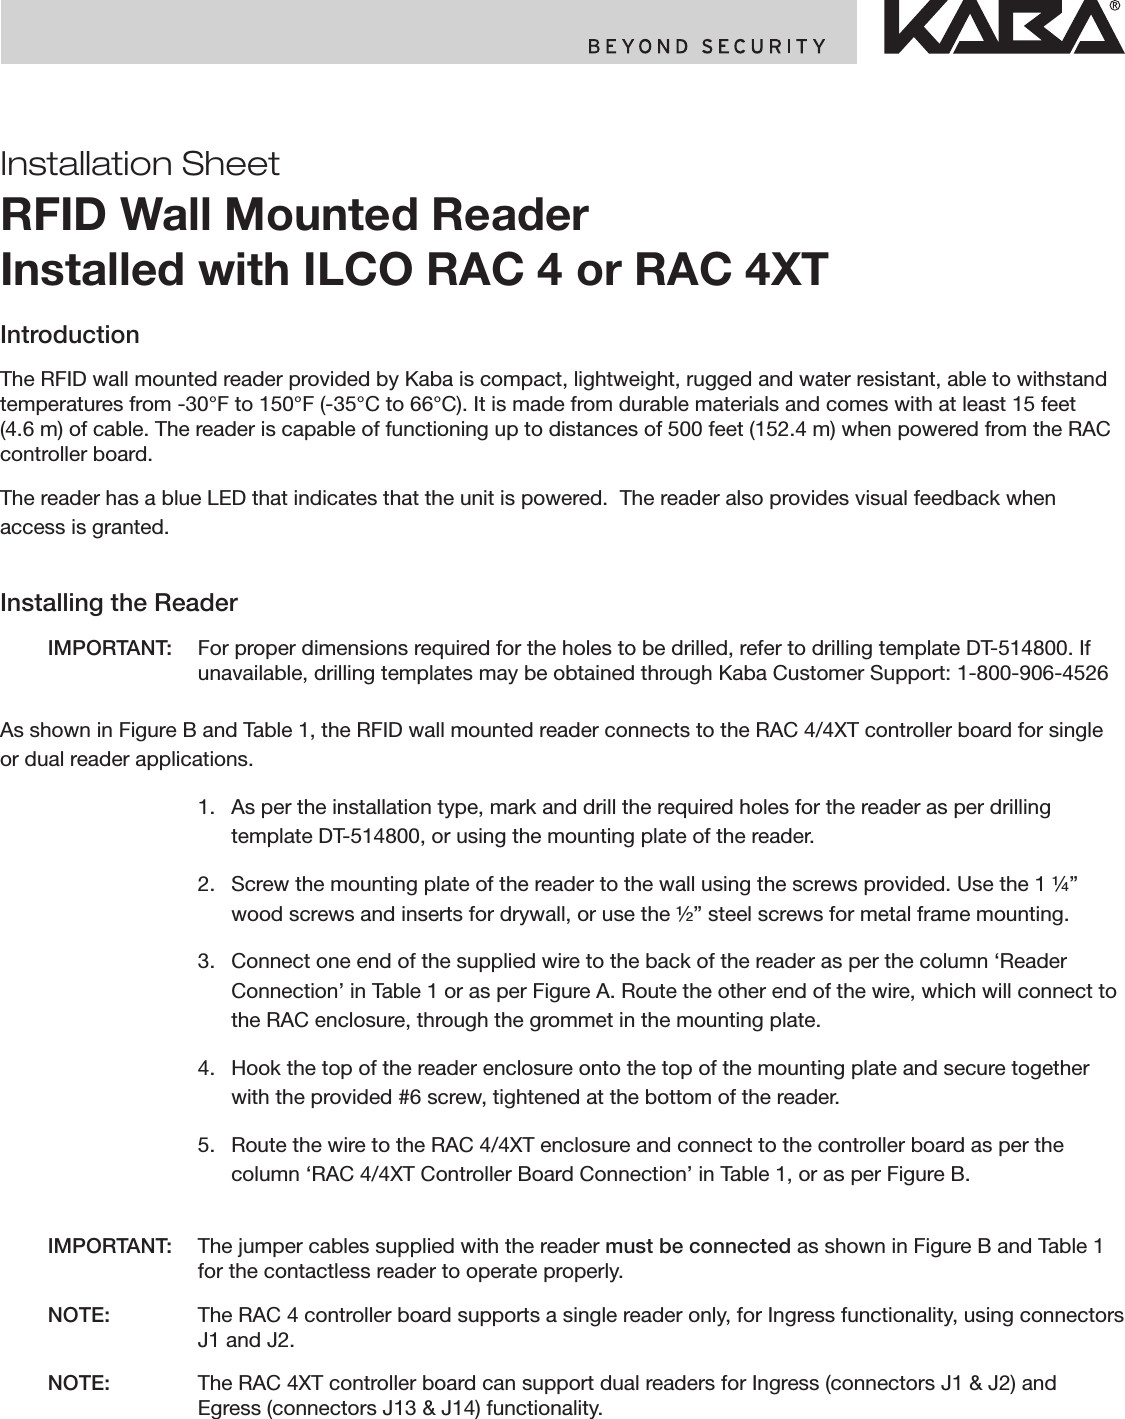 Installation SheetRFID Wall Mounted Reader Installed with ILCO RAC 4 or RAC 4XTIntroductionThe RFID wall mounted reader provided by Kaba is compact, lightweight, rugged and water resistant, able to withstand temperatures from -30°F to 150°F (-35°C to 66°C). It is made from durable materials and comes with at least 15 feet (4.6 m) of cable. The reader is capable of functioning up to distances of 500 feet (152.4 m) when powered from the RAC controller board.The reader has a blue LED that indicates that the unit is powered.  The reader also provides visual feedback when access is granted.Installing the Reader  IMPORTANT:  For proper dimensions required for the holes to be drilled, refer to drilling template DT-514800. If unavailable, drilling templates may be obtained through Kaba Customer Support: 1-800-906-4526As shown in Figure B and Table 1, the RFID wall mounted reader connects to the RAC 4/4XT controller board for single or dual reader applications.    1.   As per the installation type, mark and drill the required holes for the reader as per drilling template DT-514800, or using the mounting plate of the reader.    2.   Screw the mounting plate of the reader to the wall using the screws provided. Use the 1 ¼” wood screws and inserts for drywall, or use the ½” steel screws for metal frame mounting.    3.   Connect one end of the supplied wire to the back of the reader as per the column ‘Reader Connection’ in Table 1 or as per Figure A. Route the other end of the wire, which will connect to the RAC enclosure, through the grommet in the mounting plate.    4.   Hook the top of the reader enclosure onto the top of the mounting plate and secure together with the provided #6 screw, tightened at the bottom of the reader.    5.   Route the wire to the RAC 4/4XT enclosure and connect to the controller board as per the column ‘RAC 4/4XT Controller Board Connection’ in Table 1, or as per Figure B.  IMPORTANT:  The jumper cables supplied with the reader must be connected as shown in Figure B and Table 1 for the contactless reader to operate properly. NOTE:   The RAC 4 controller board supports a single reader only, for Ingress functionality, using connectors J1 and J2. NOTE:   The RAC 4XT controller board can support dual readers for Ingress (connectors J1 &amp; J2) and Egress (connectors J13 &amp; J14) functionality.